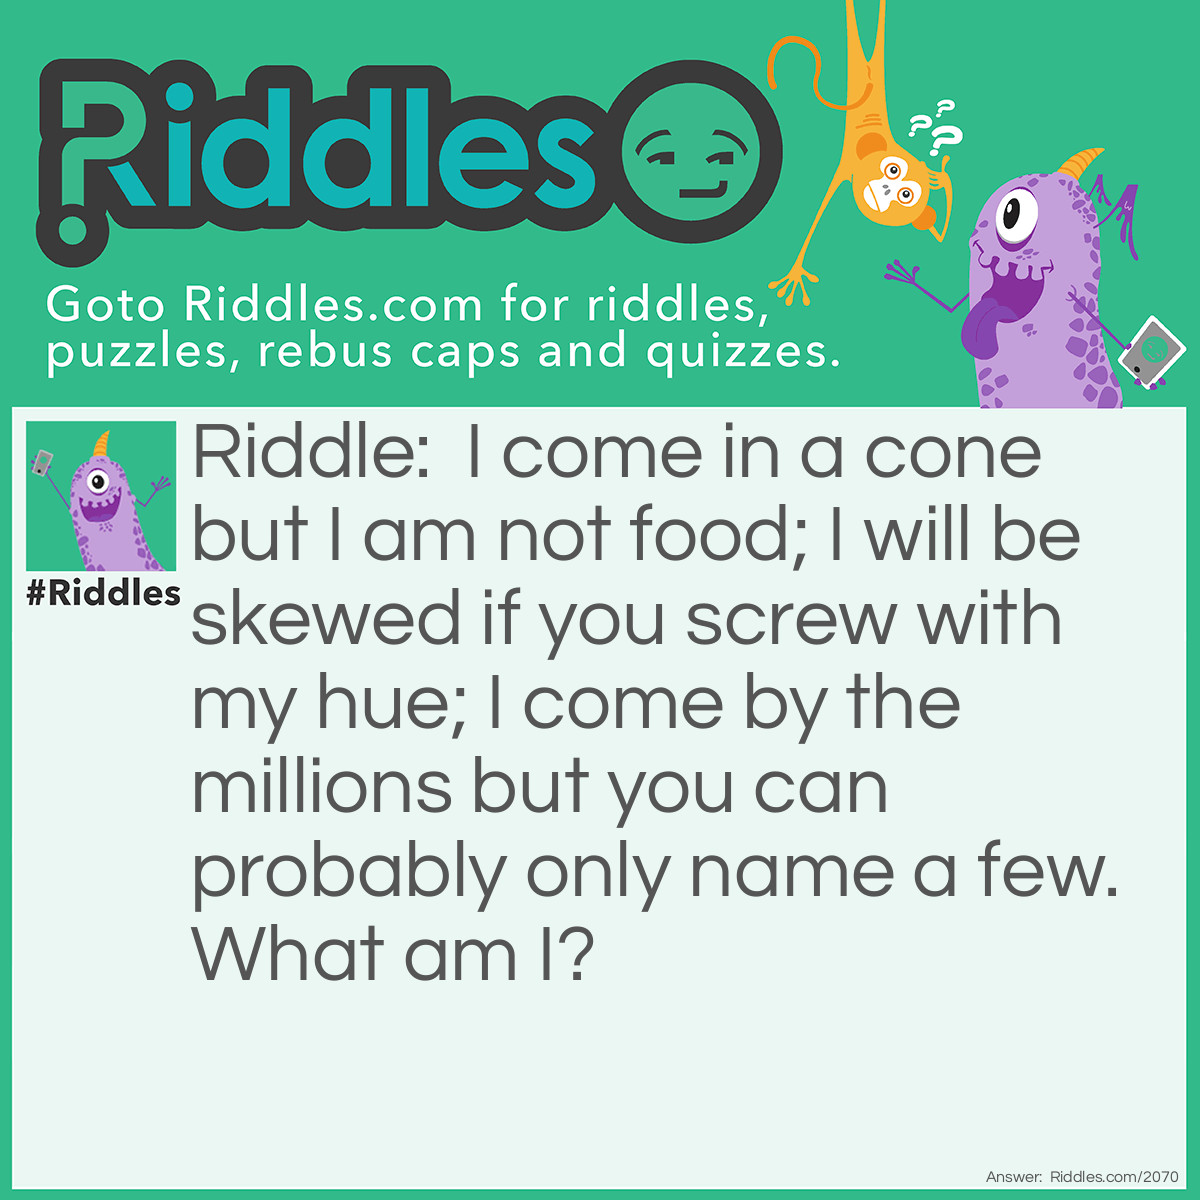 Riddle: I come in a cone but I am not food;
I will be skewed if you screw with my hue;
I come by the millions but you can probably only name a few.
What am I? Answer: Colors.